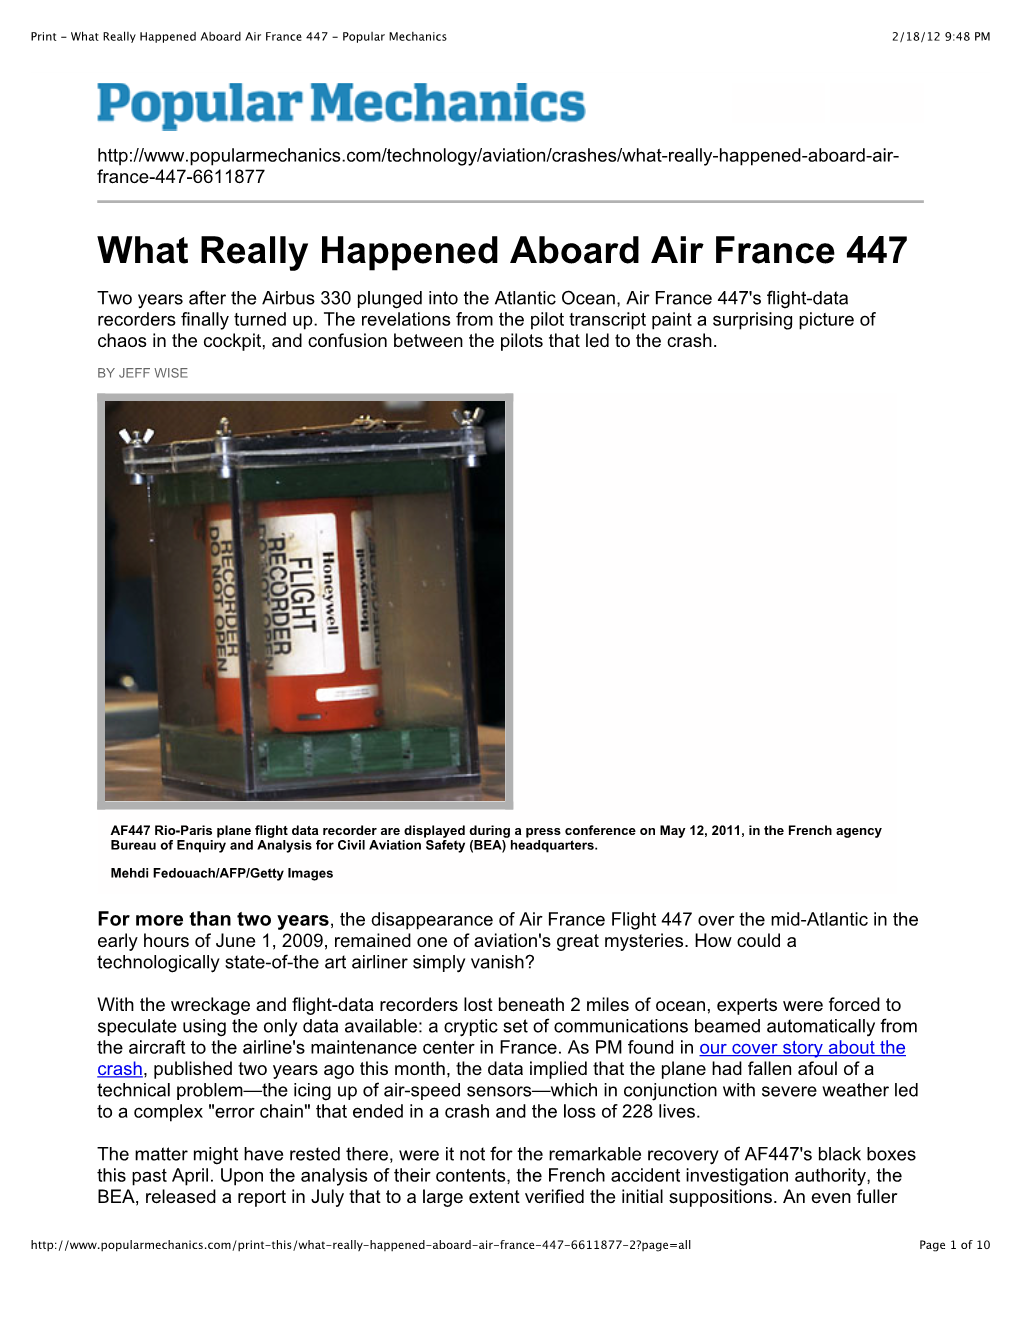 Print - What Really Happened Aboard Air France 447 - Popular Mechanics 2/18/12 9:48 PM